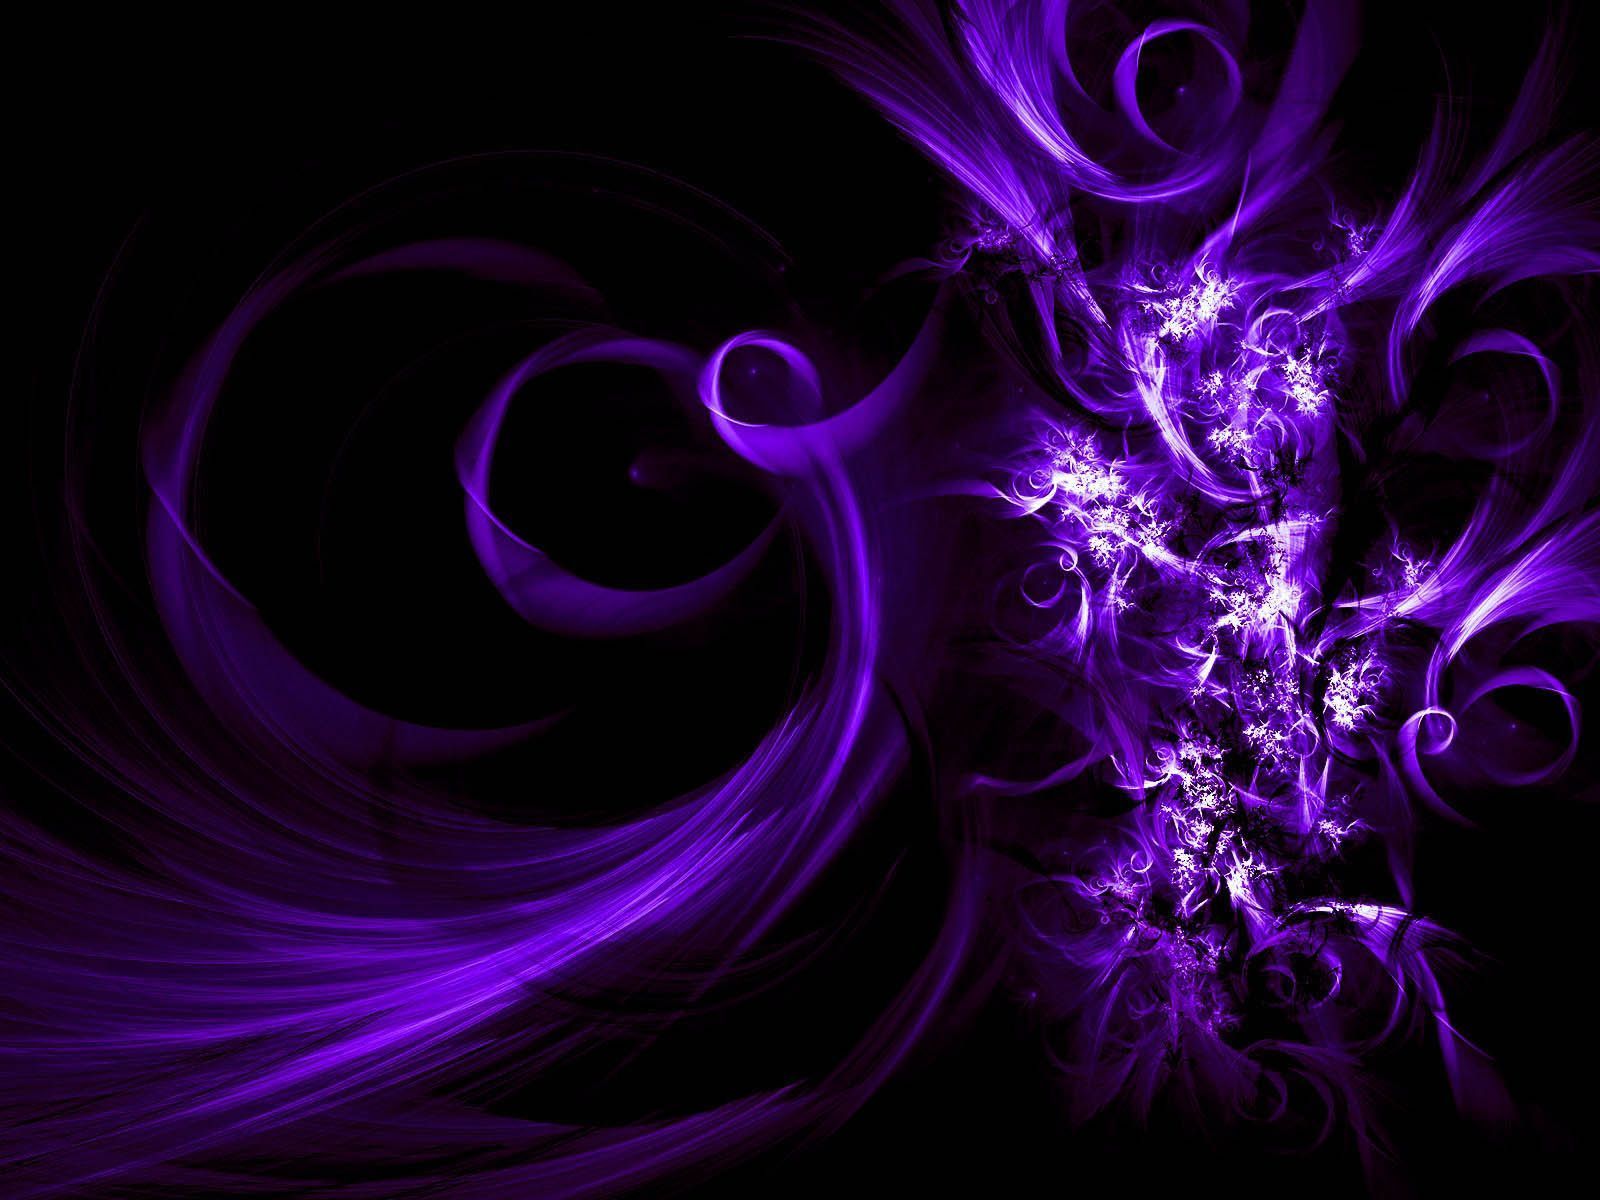 Black and Purple Abstract Wallpaper Free Black and Purple